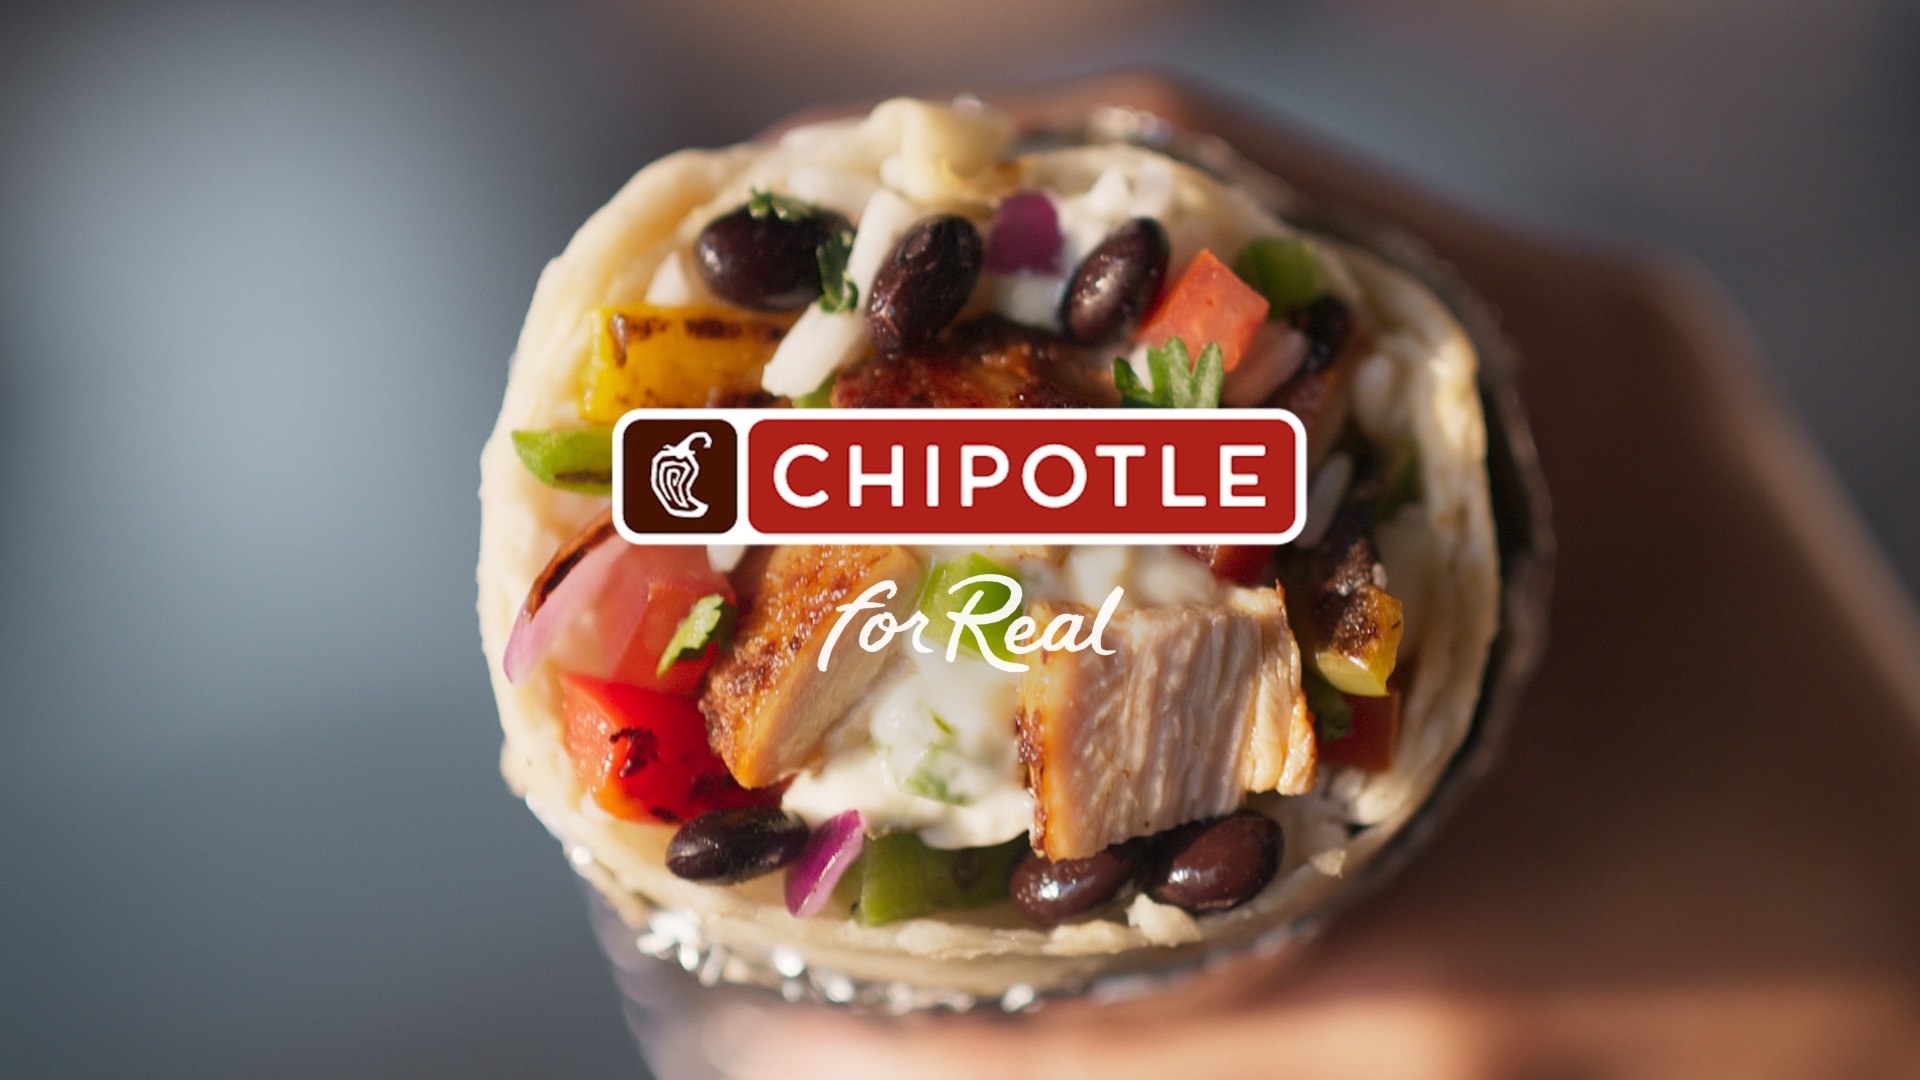 Chipotle: An operator of the fast-food chain in the US, Tacos, Burritos. 1920x1080 Full HD Wallpaper.